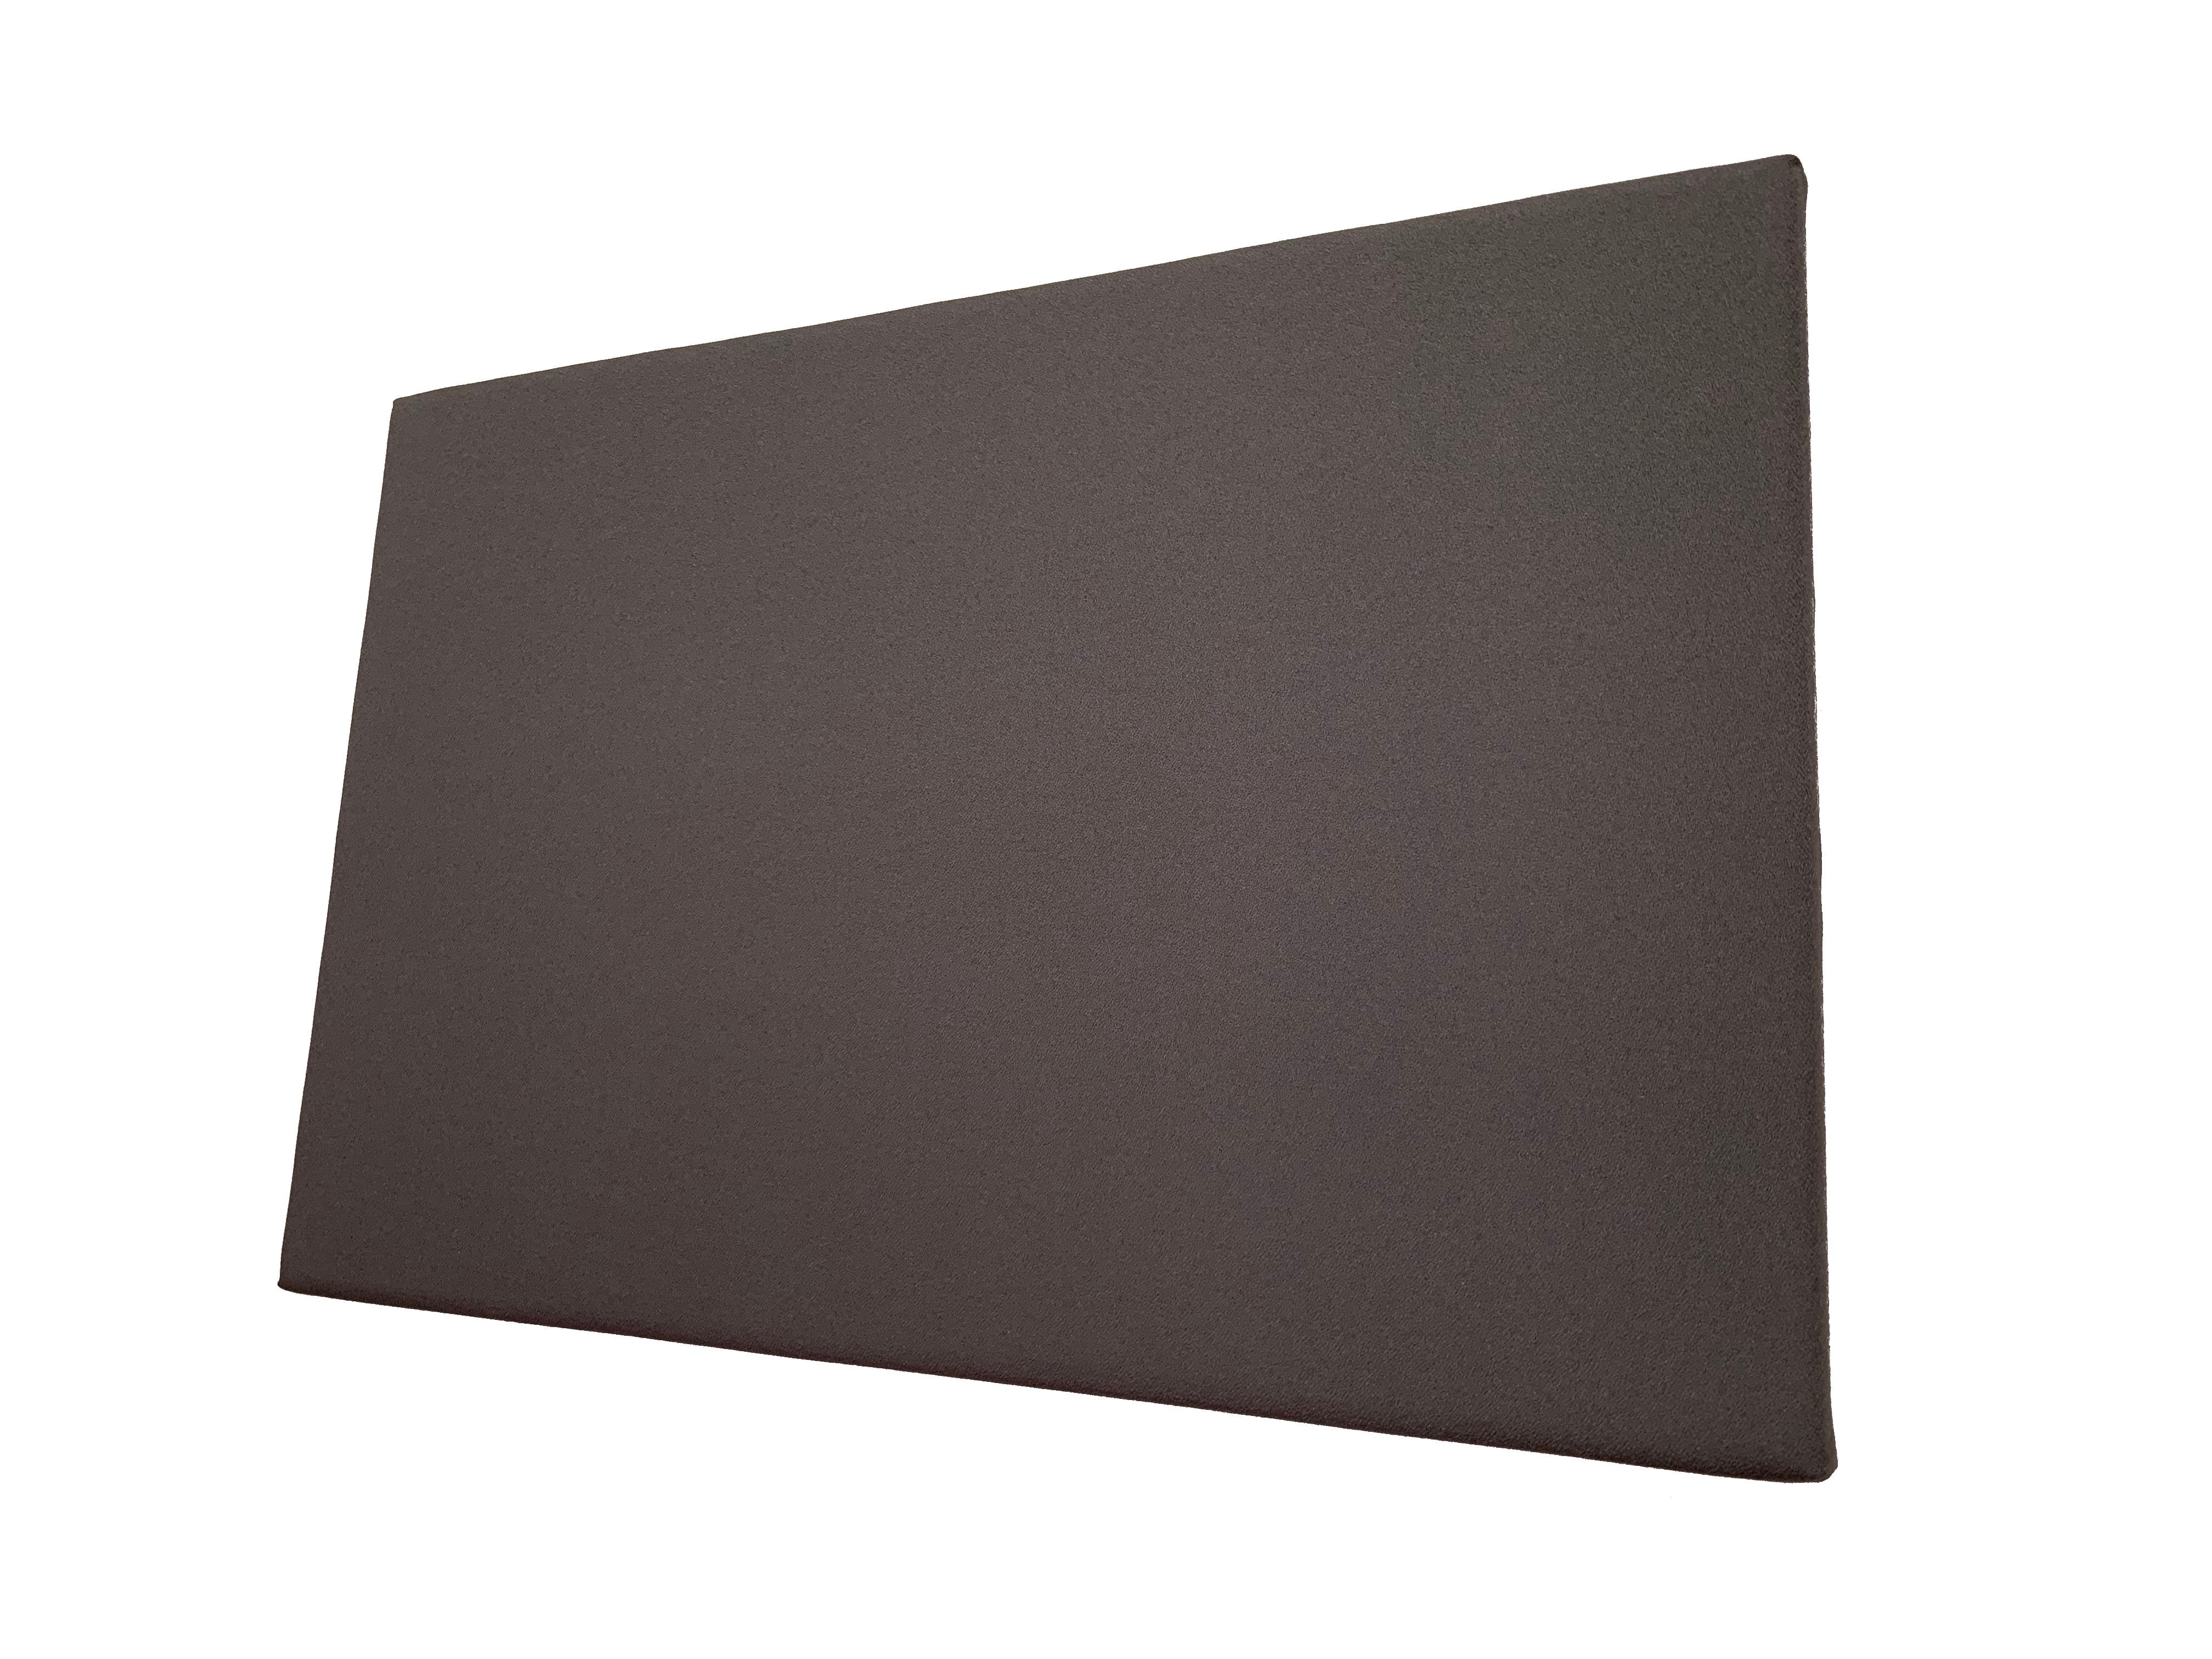 2" SoundControl Wall Mounted Acoustic Panel 2ft by 3ft - Advanced Acoustics